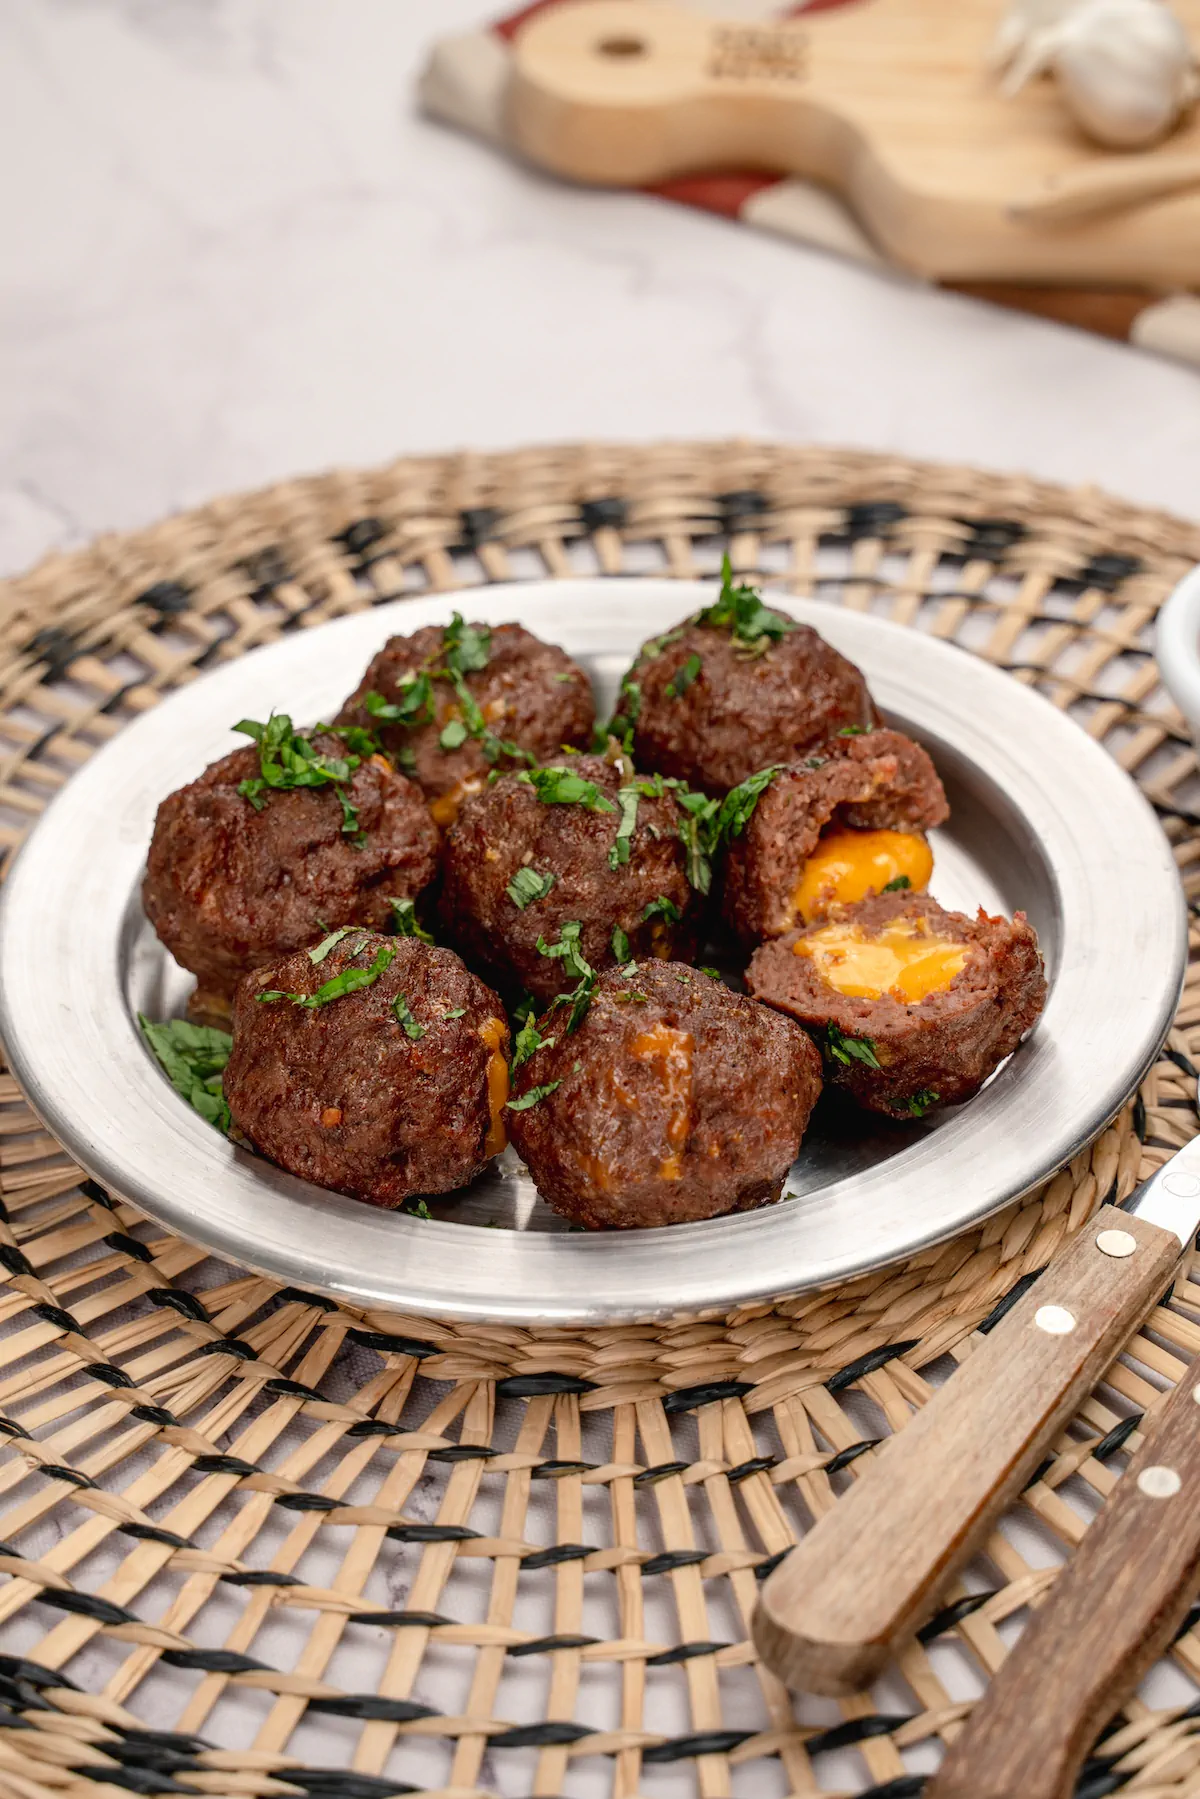 Low-carb cheese-stuffed meatballs on a plate, with one cut open to show the melted cheese.